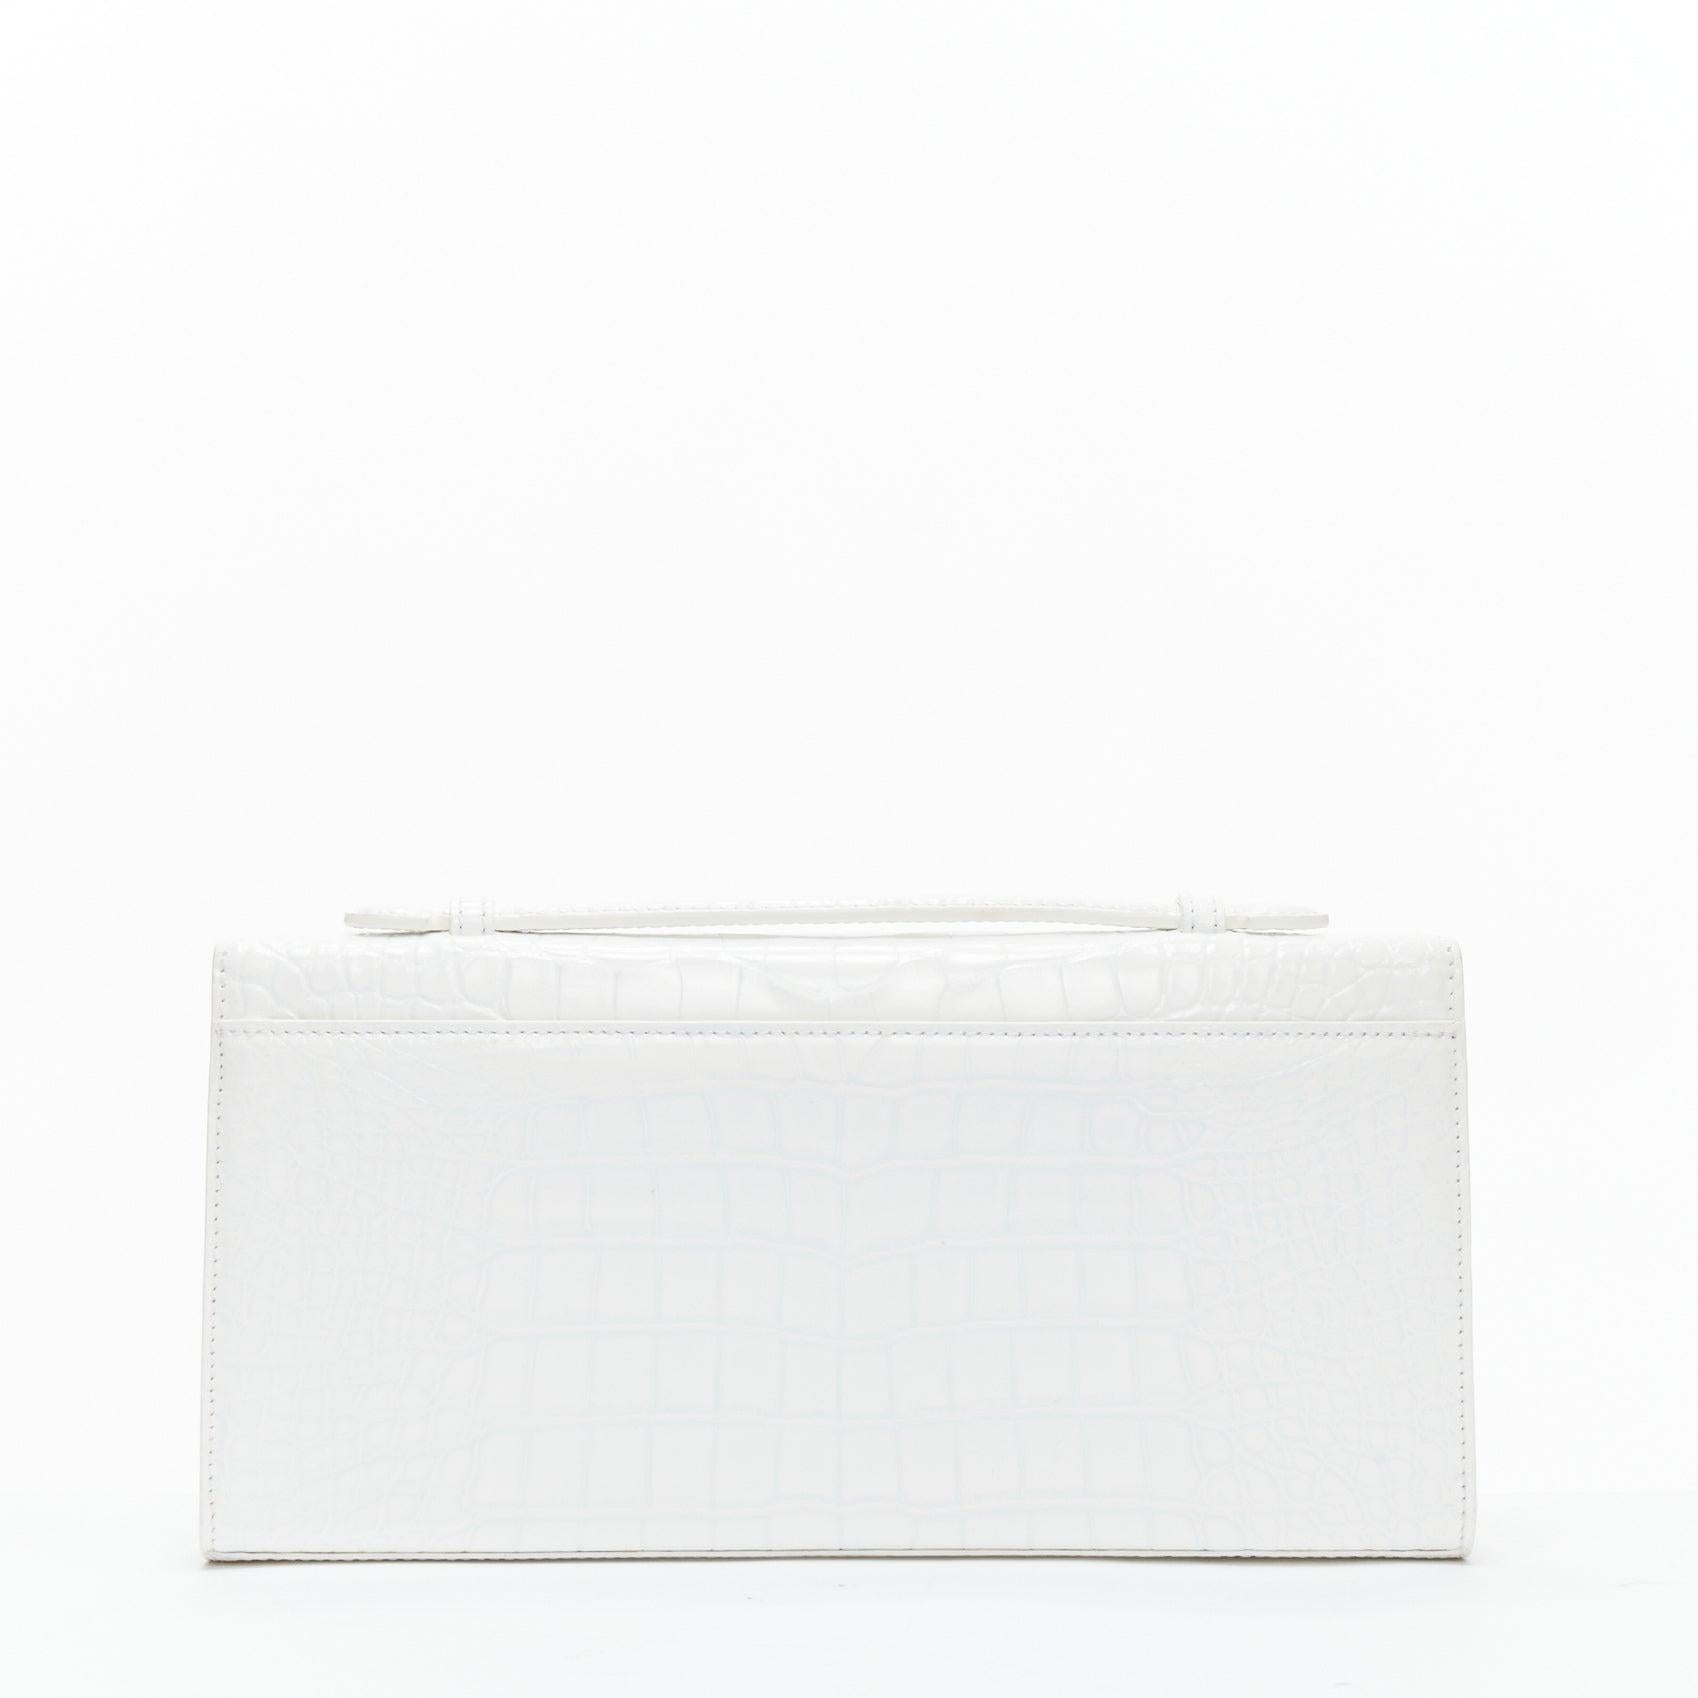 FERIDA YANG Bespoke white matte scaled leather gold buckle long flap clutch For Sale 1